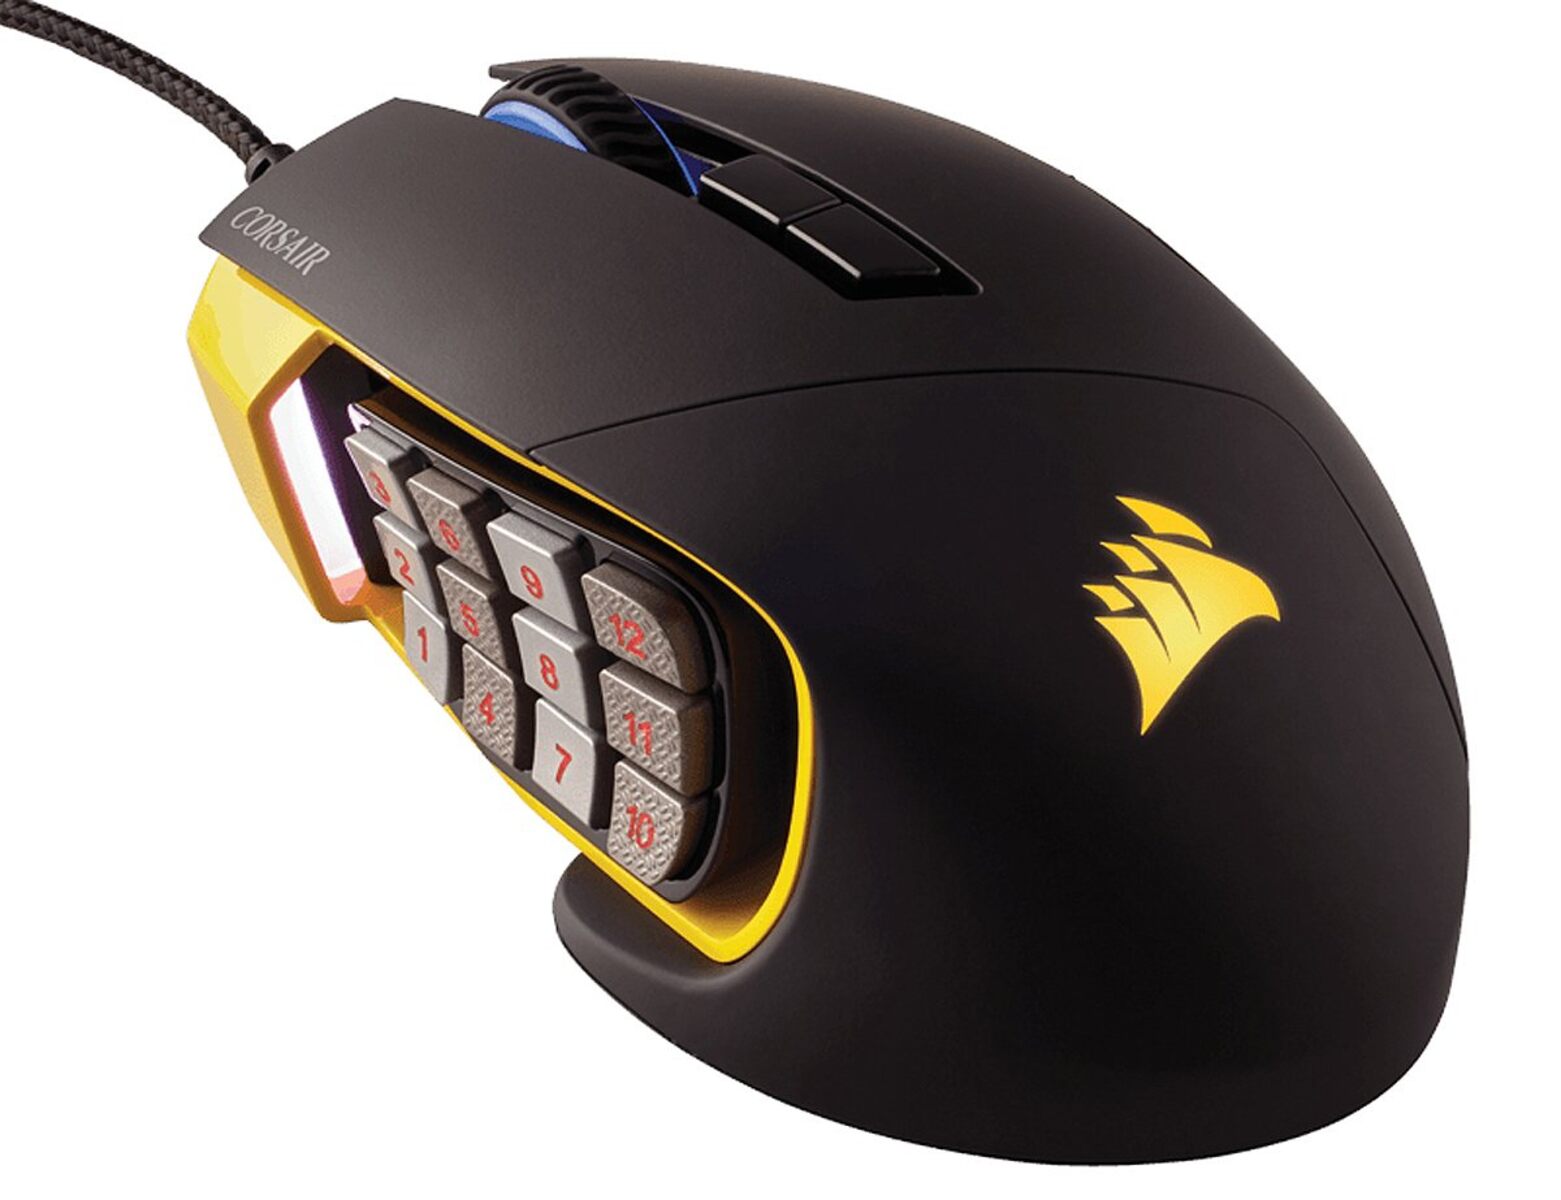 Corsair M95 RGB Laser Gaming Mouse: How To Remove Mouse Wheel